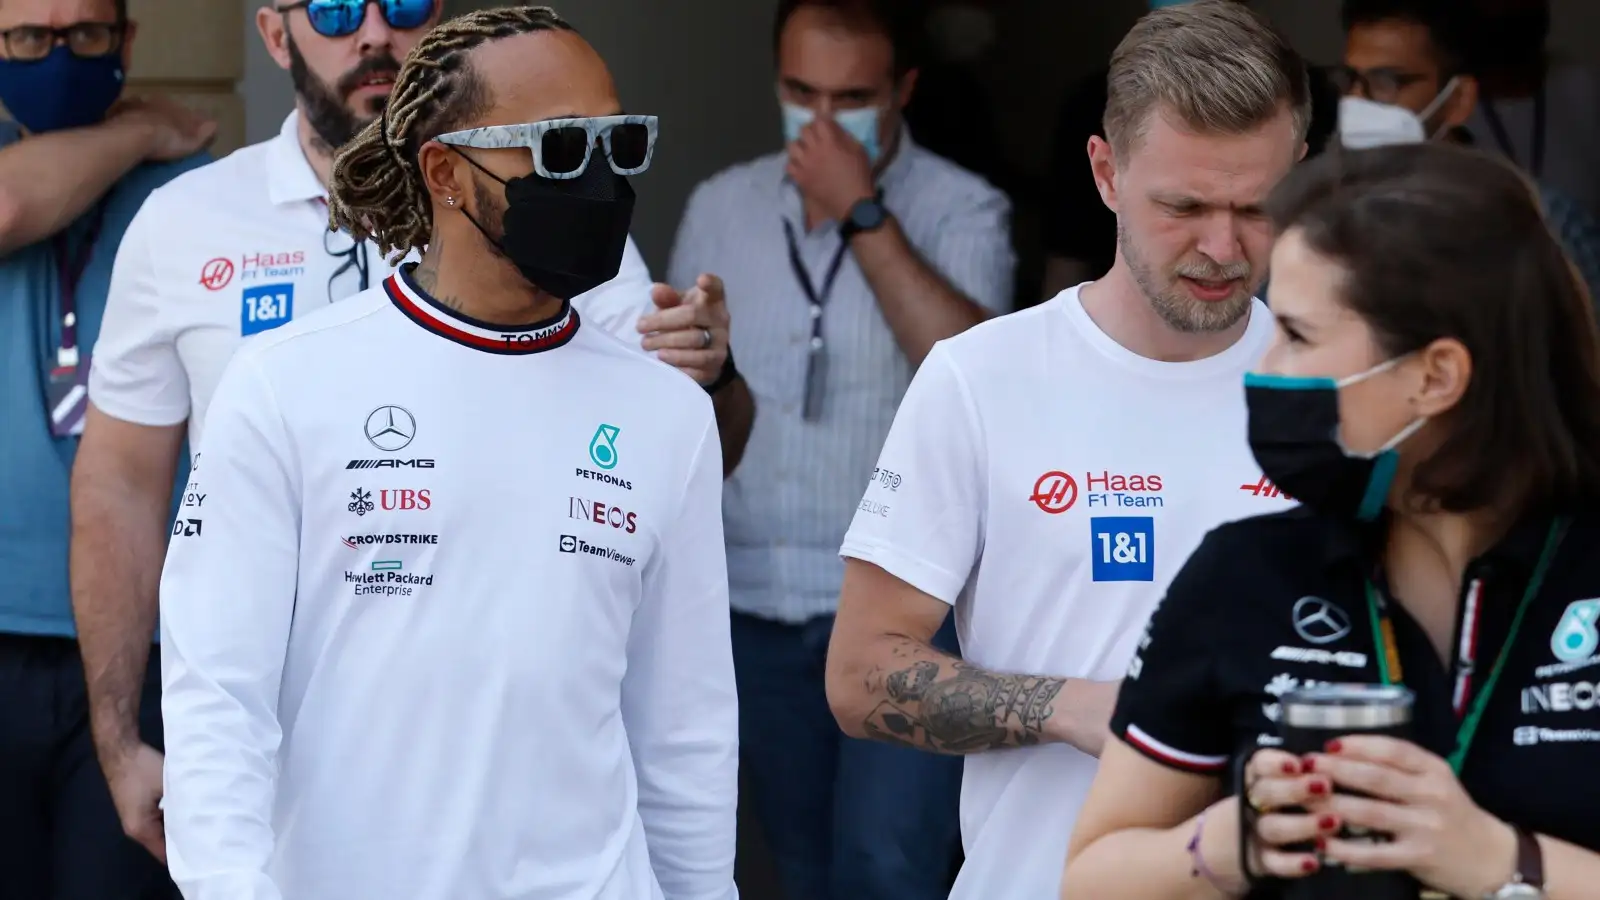 Lewis Hamilton, Mercedes, and Kevin Magnussen, Haas, walk together. Bahrain, March 2022.